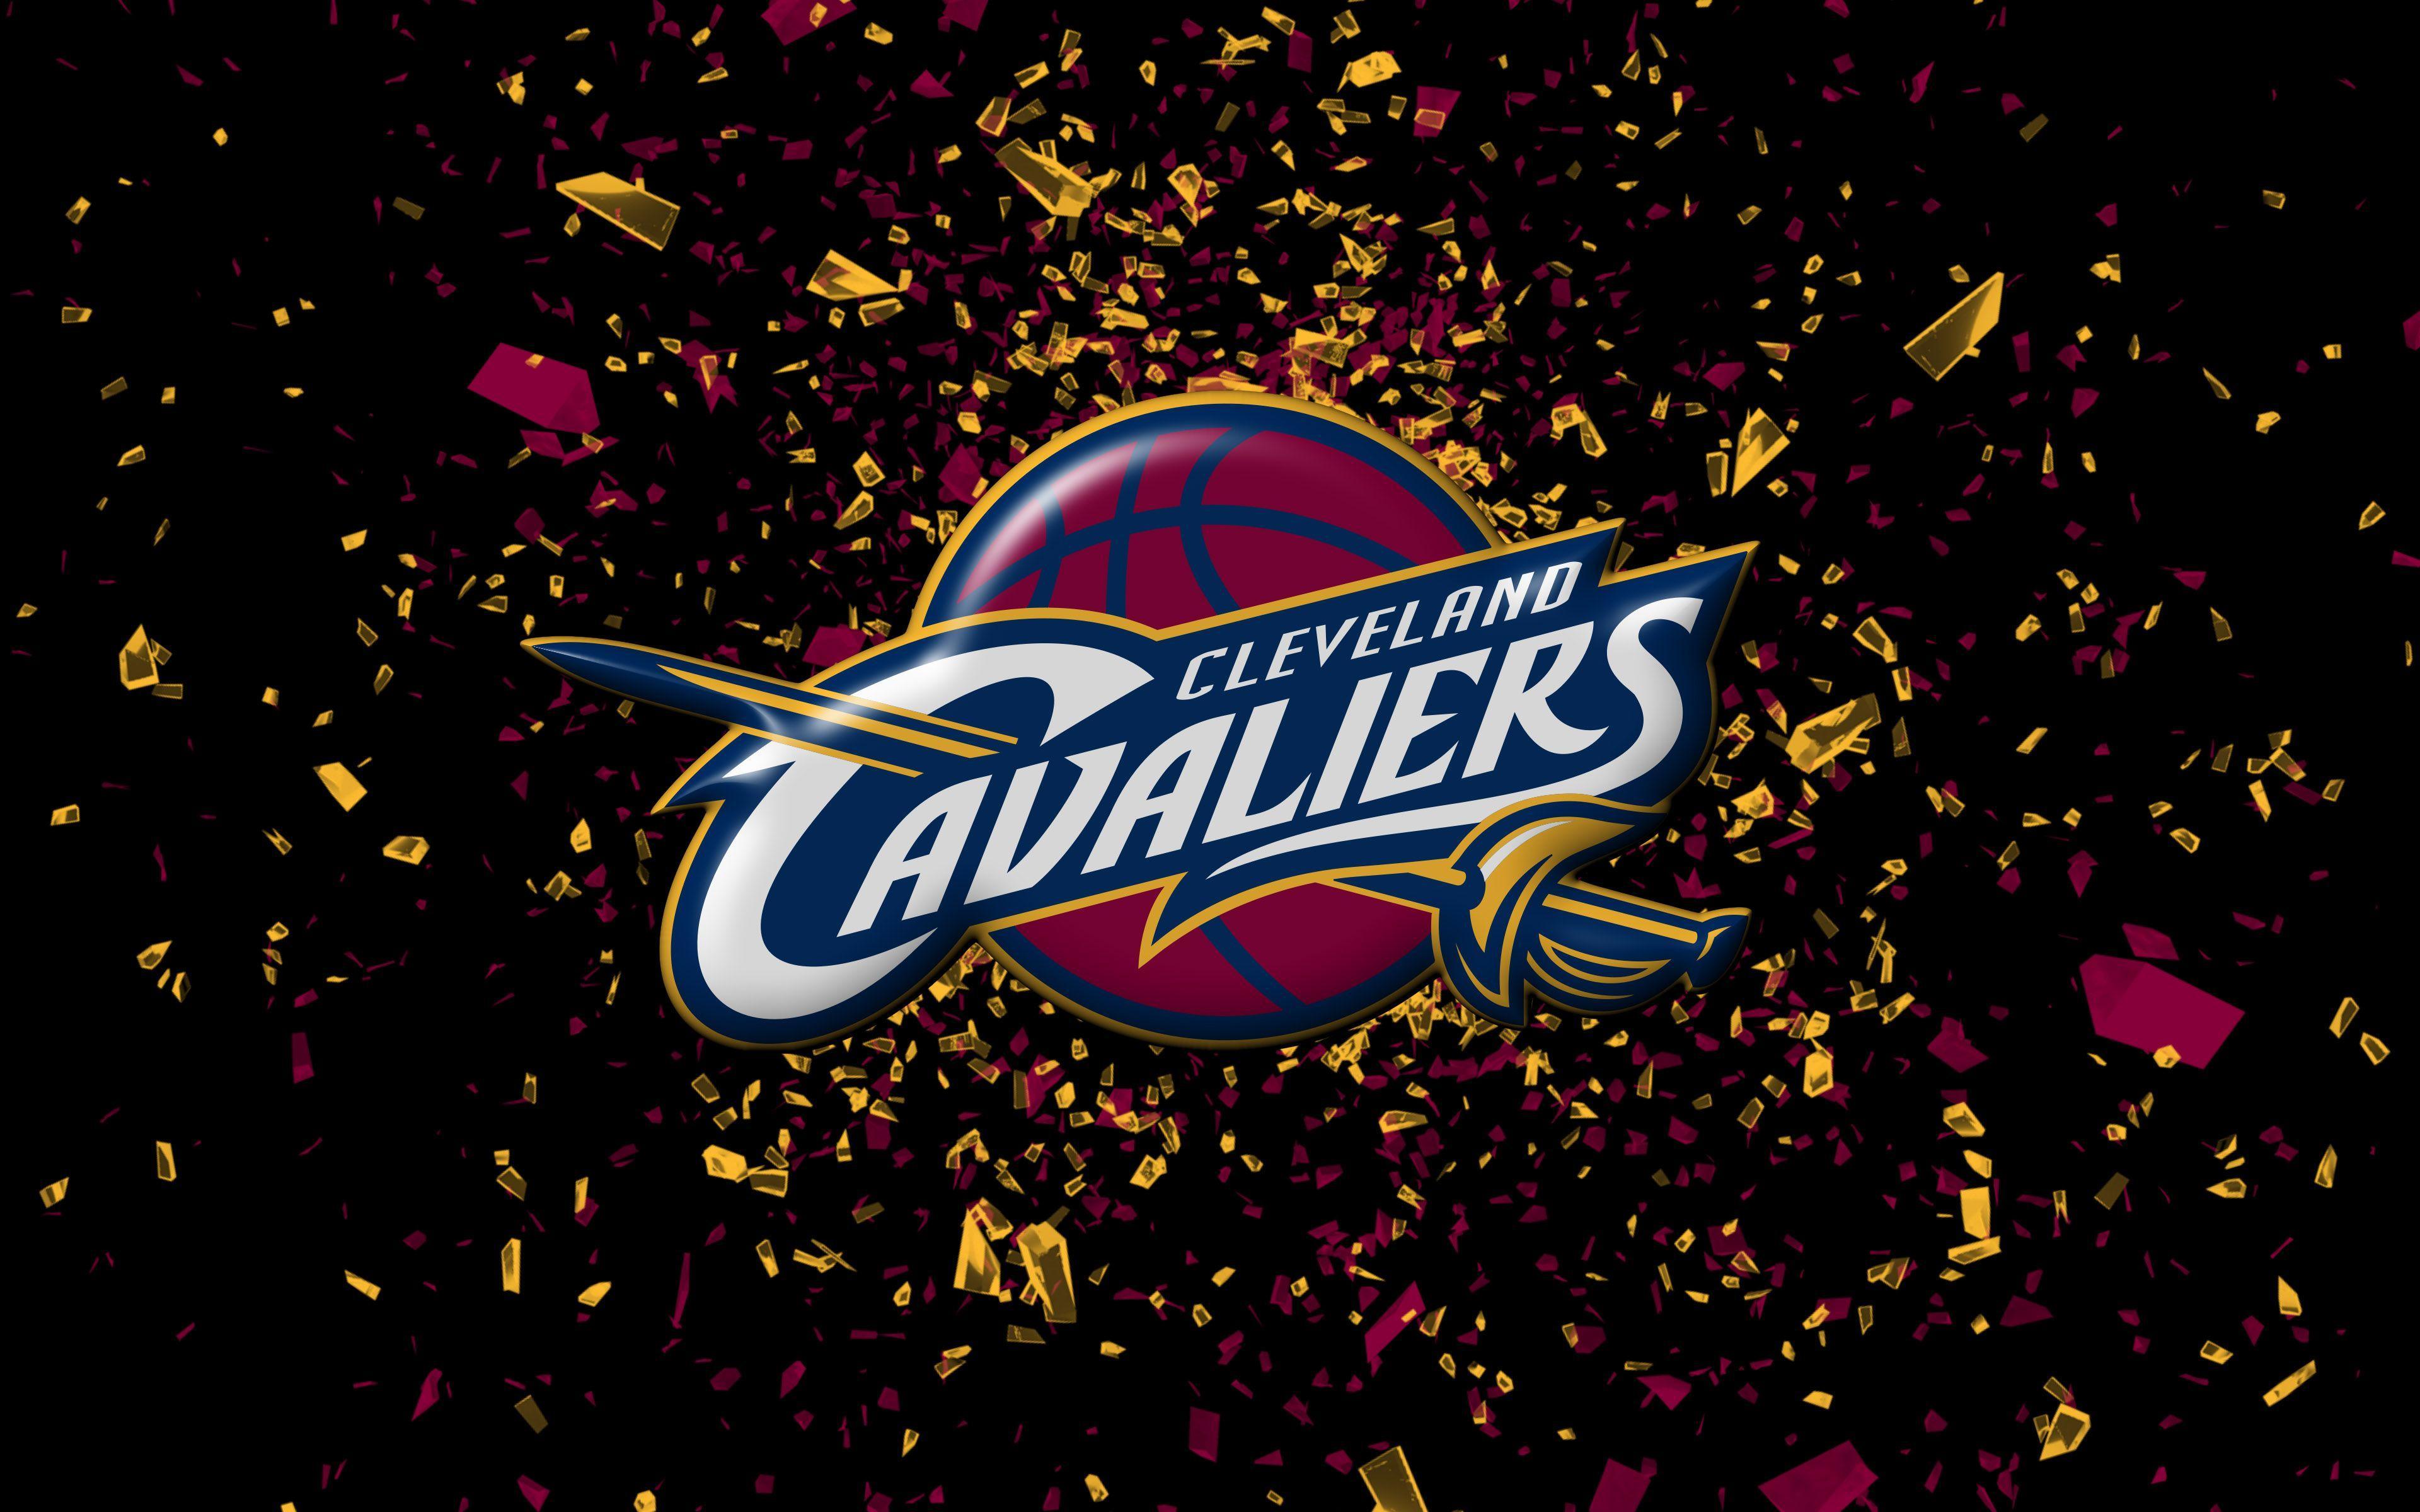 Cleveland Cavaliers 2014 Logo Wallpapers Wide or HD